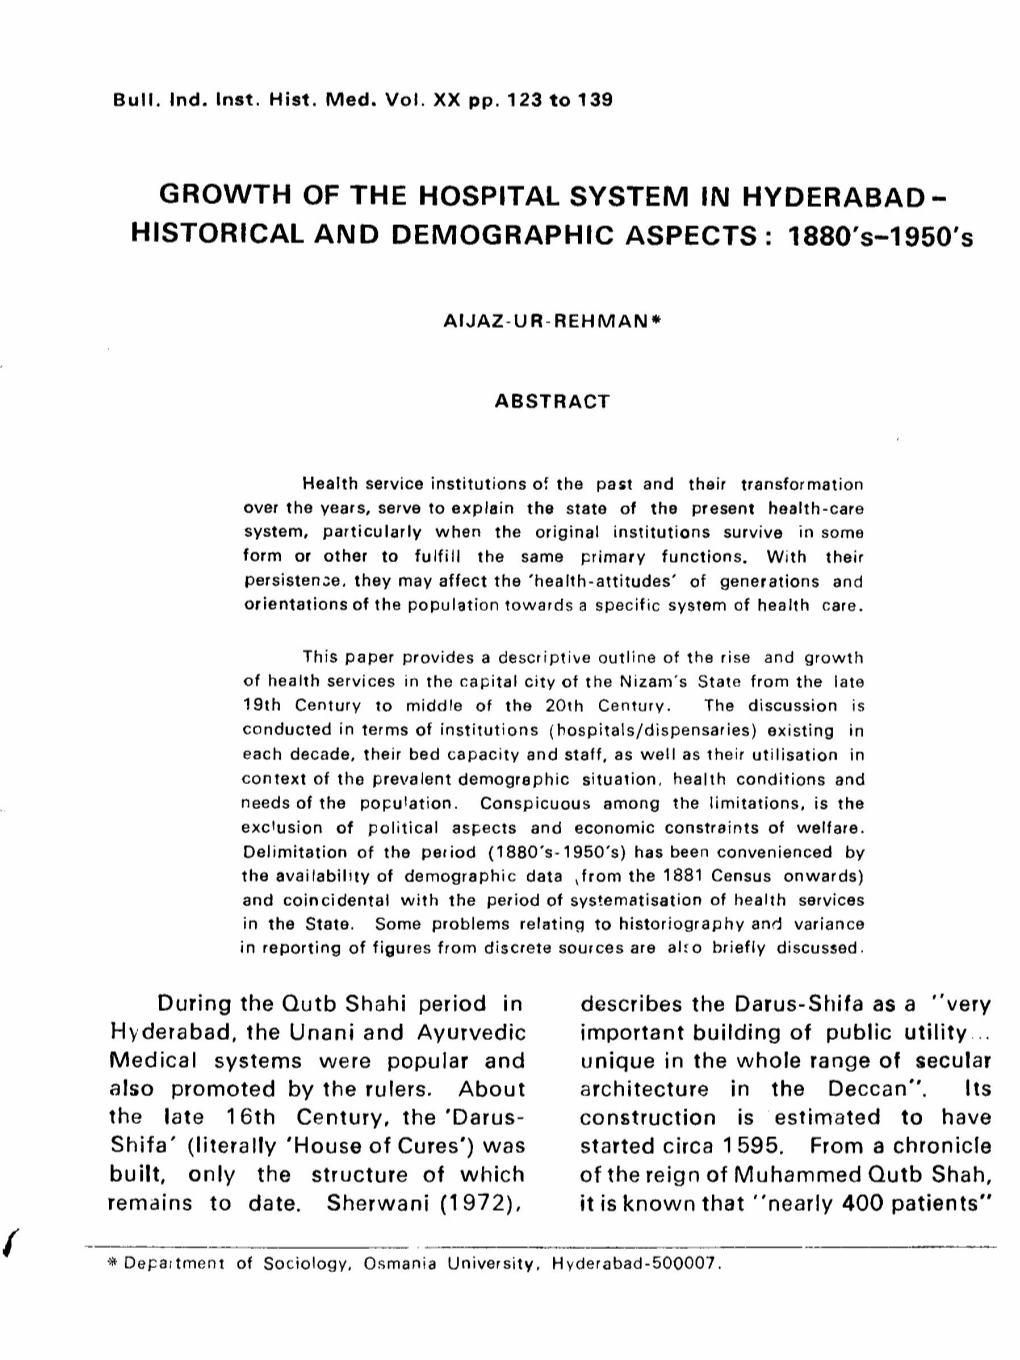 GROWTH of the HOSPITAL SYSTEM in HYDERABAD- HISTORICAL and DEMOGRAPHIC ASPECTS: 1880'S-1950'S